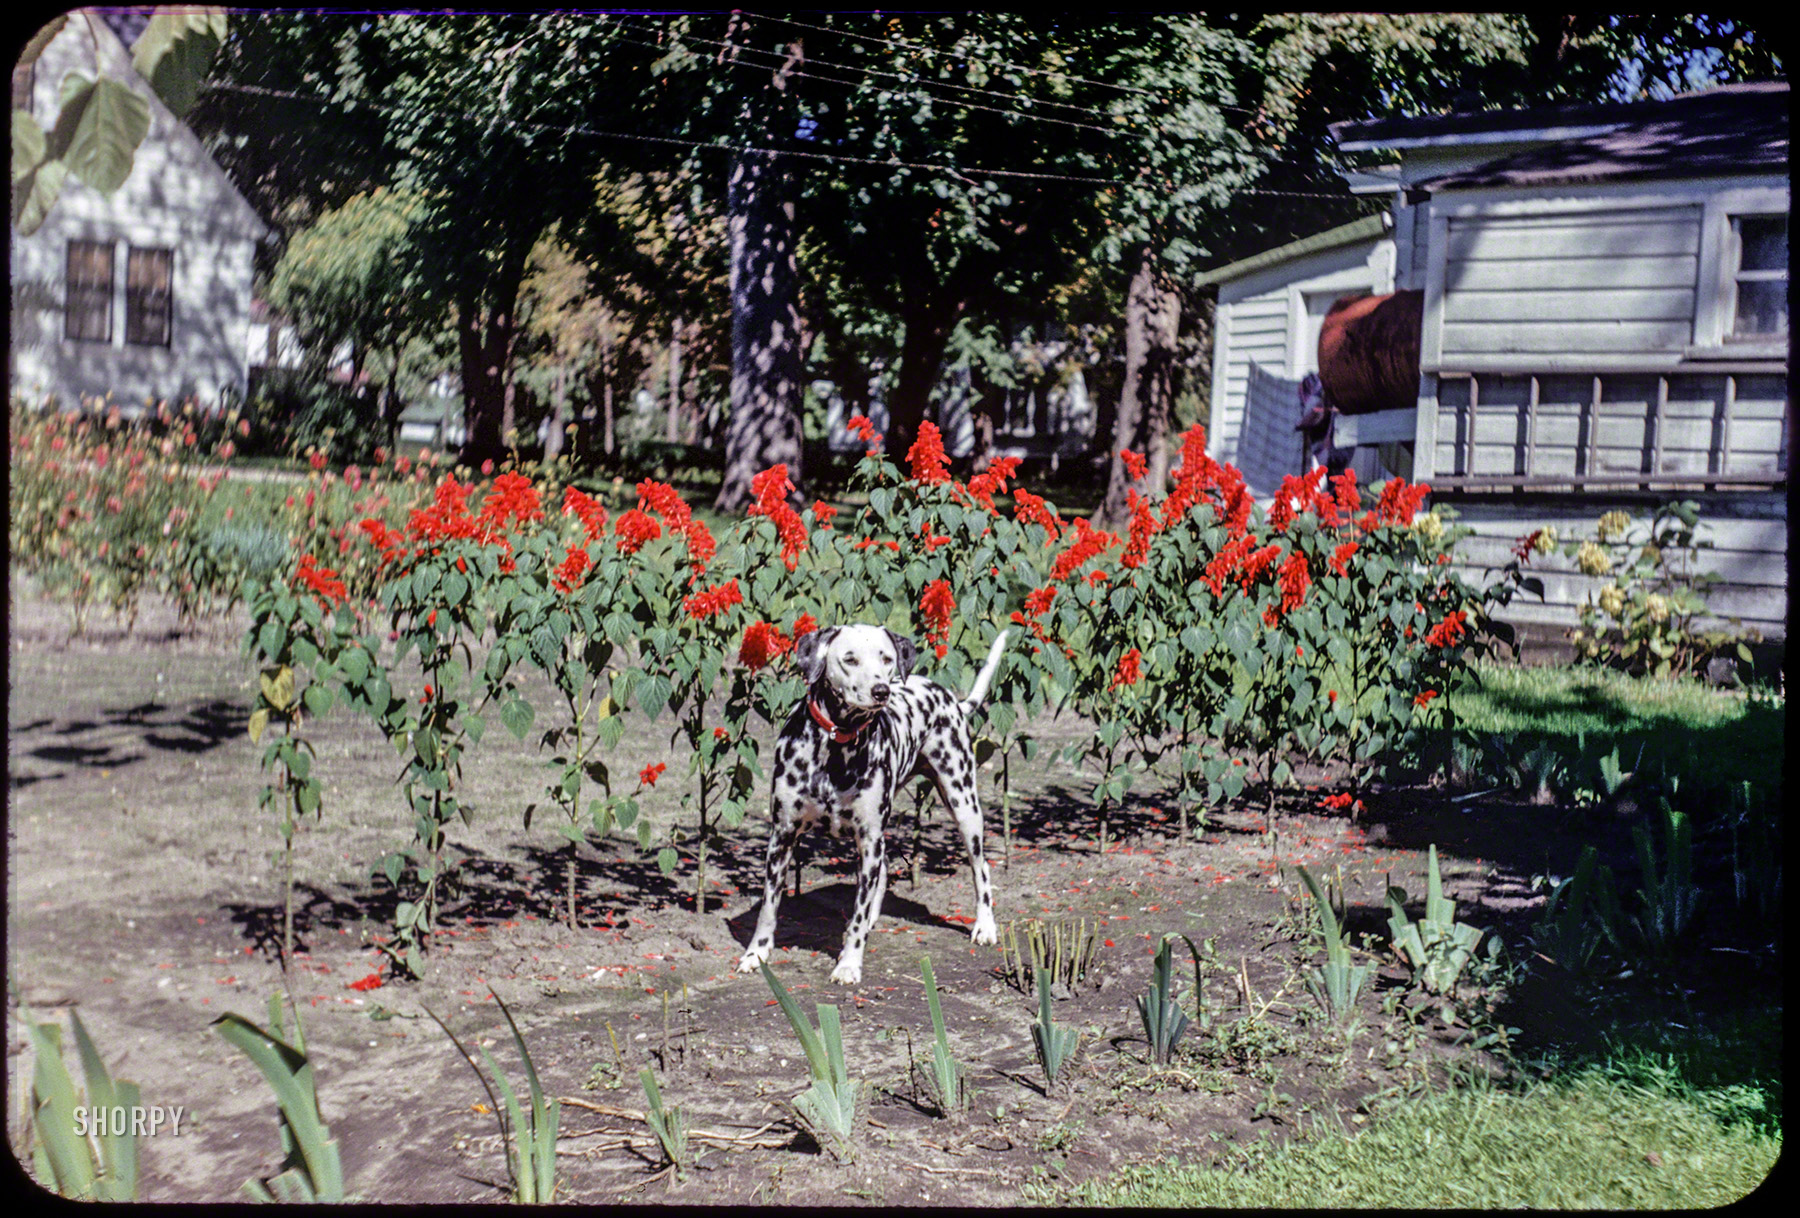 "Sally in garden -- 18 Sept 1951." From Blue Earth, Minnesota, our latest Kodachrome by Grace or Hubert Tuttle. View full size.